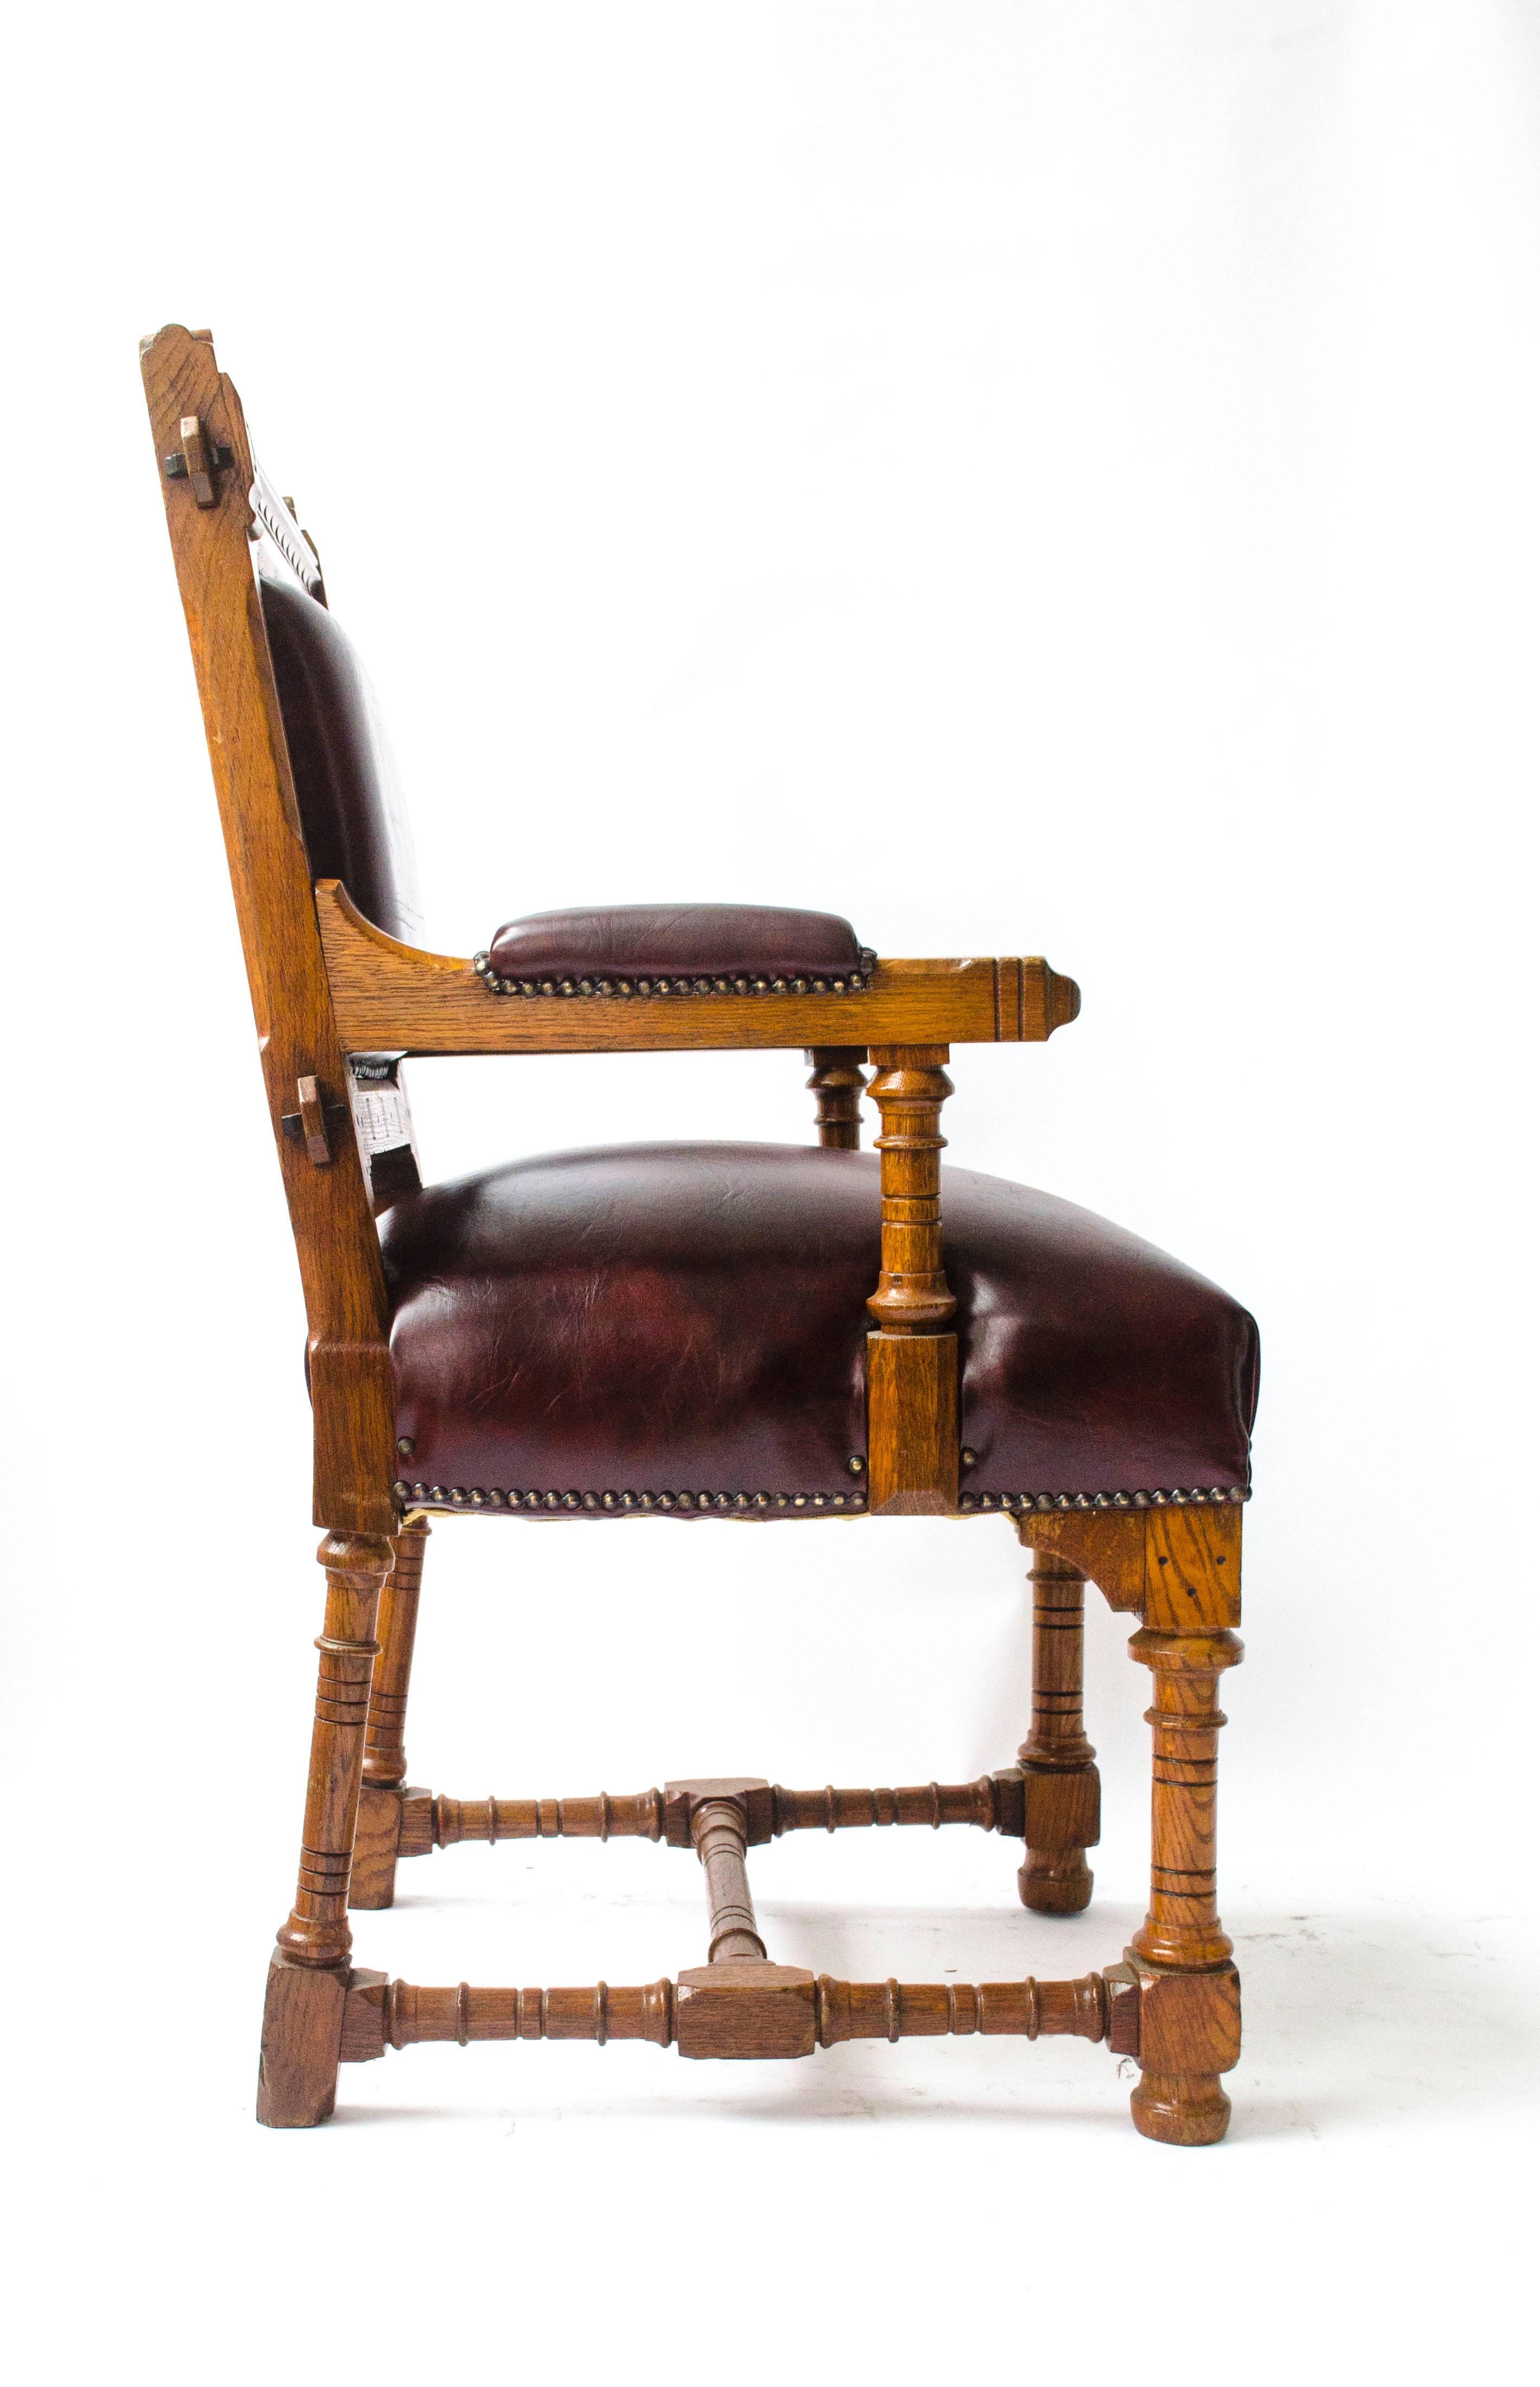 A Gothic Revival oak armchair designed by John Pollard Seddon, made by his family firm Thomas Seddon (Seddon and Co). Based in Bond Street, they supplied furniture to Windsor castle and Buckingham Palace, founded by his Great Grandfather George